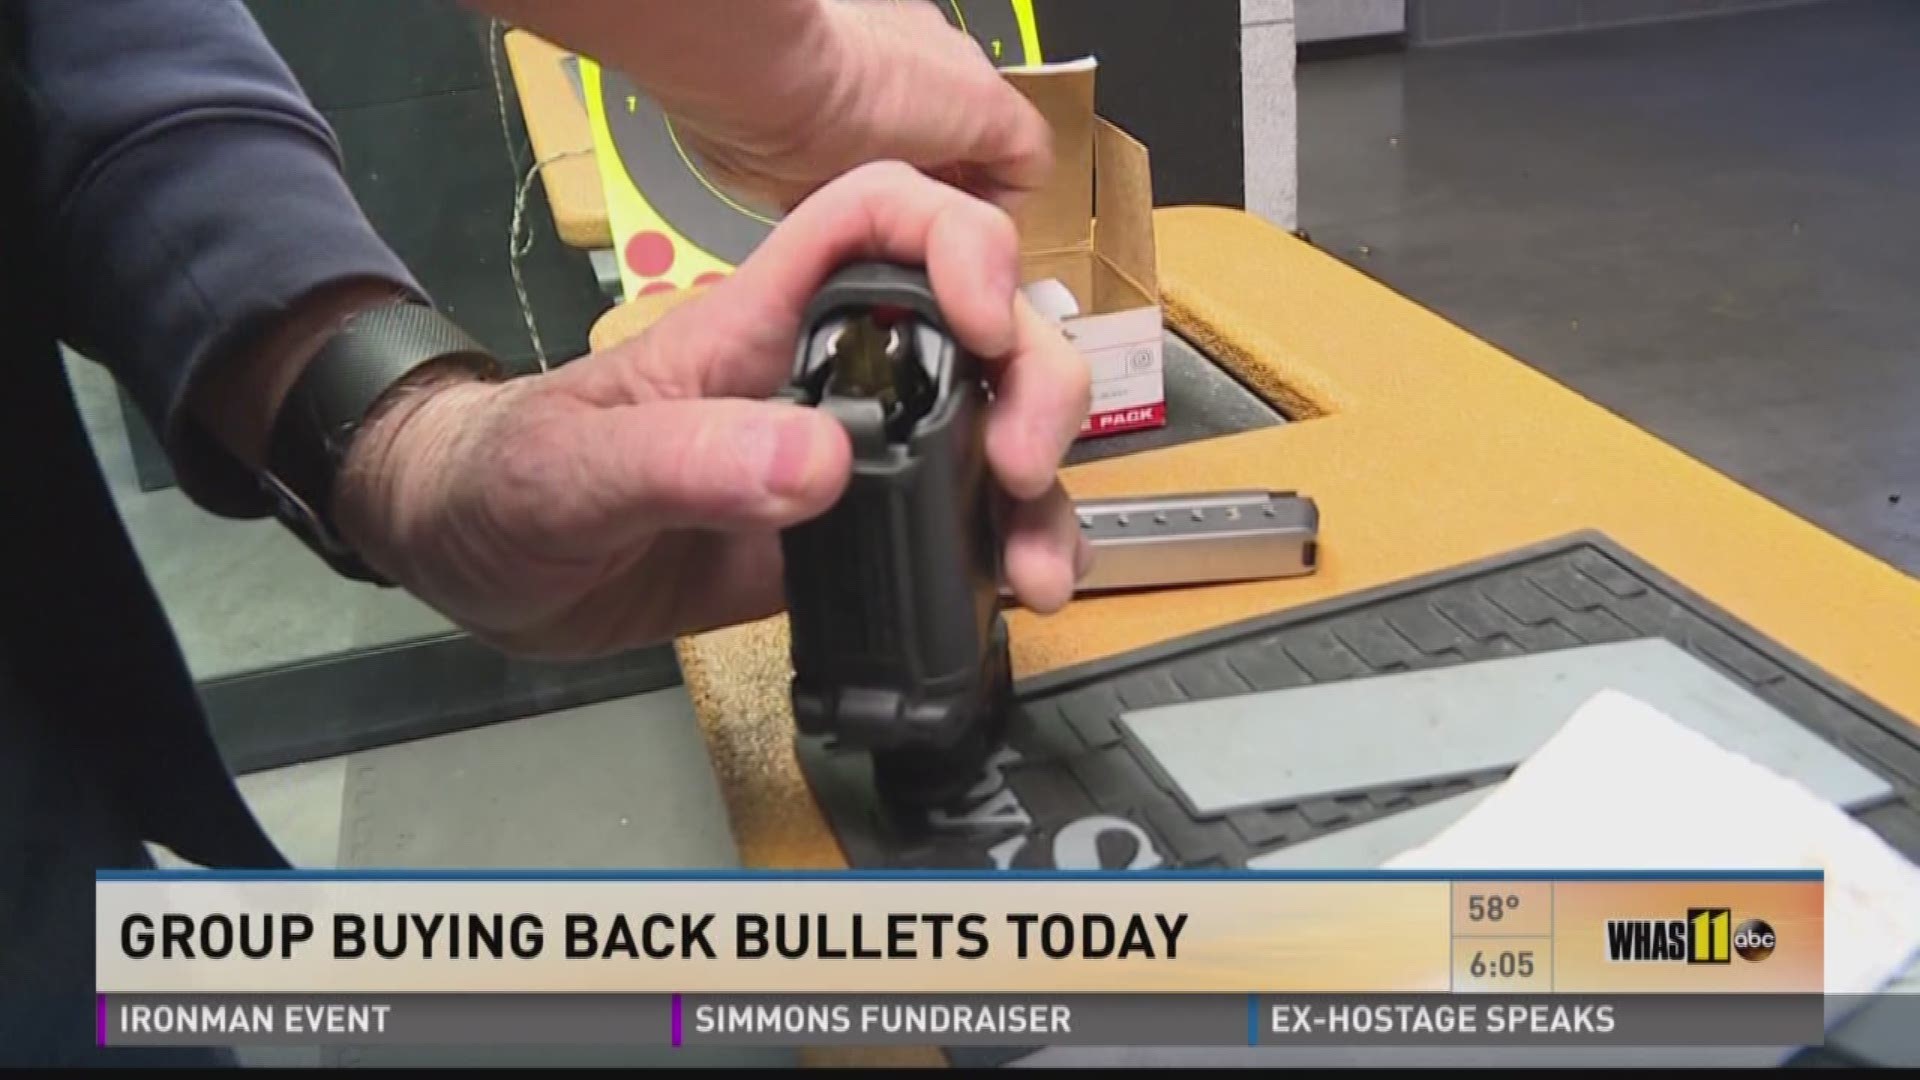 Group buying back bullets today